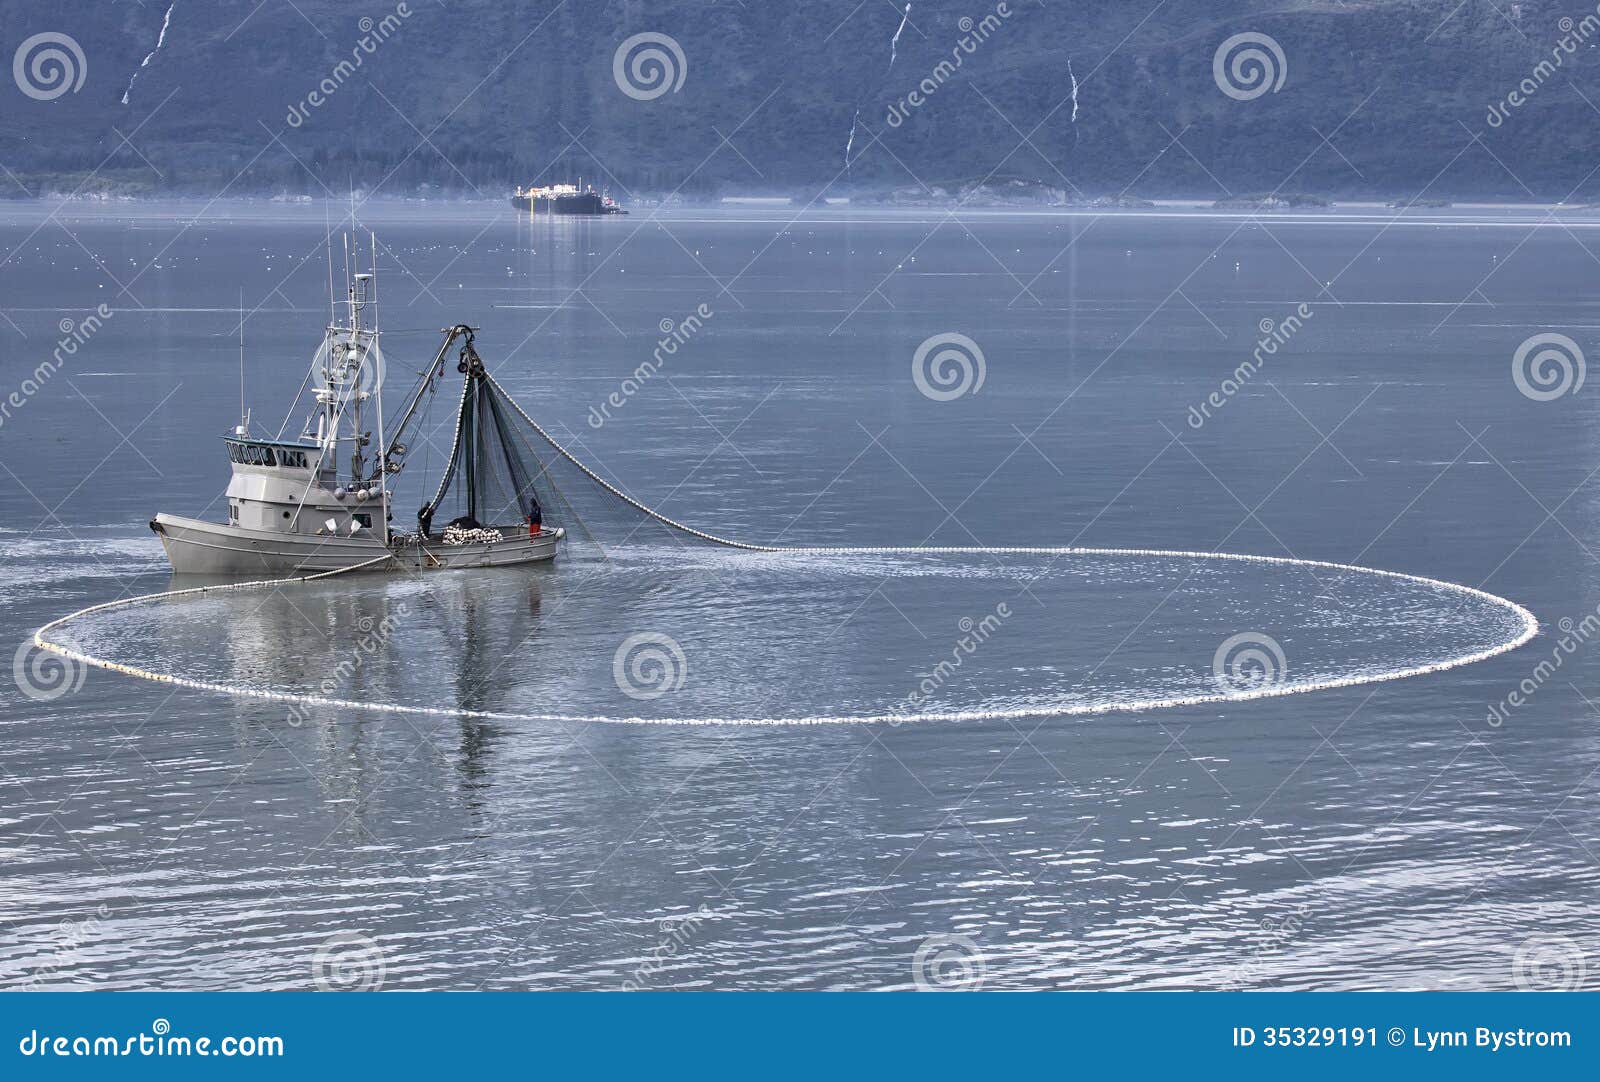 Commercial Fishing Boat Stock Image - Image: 35329191